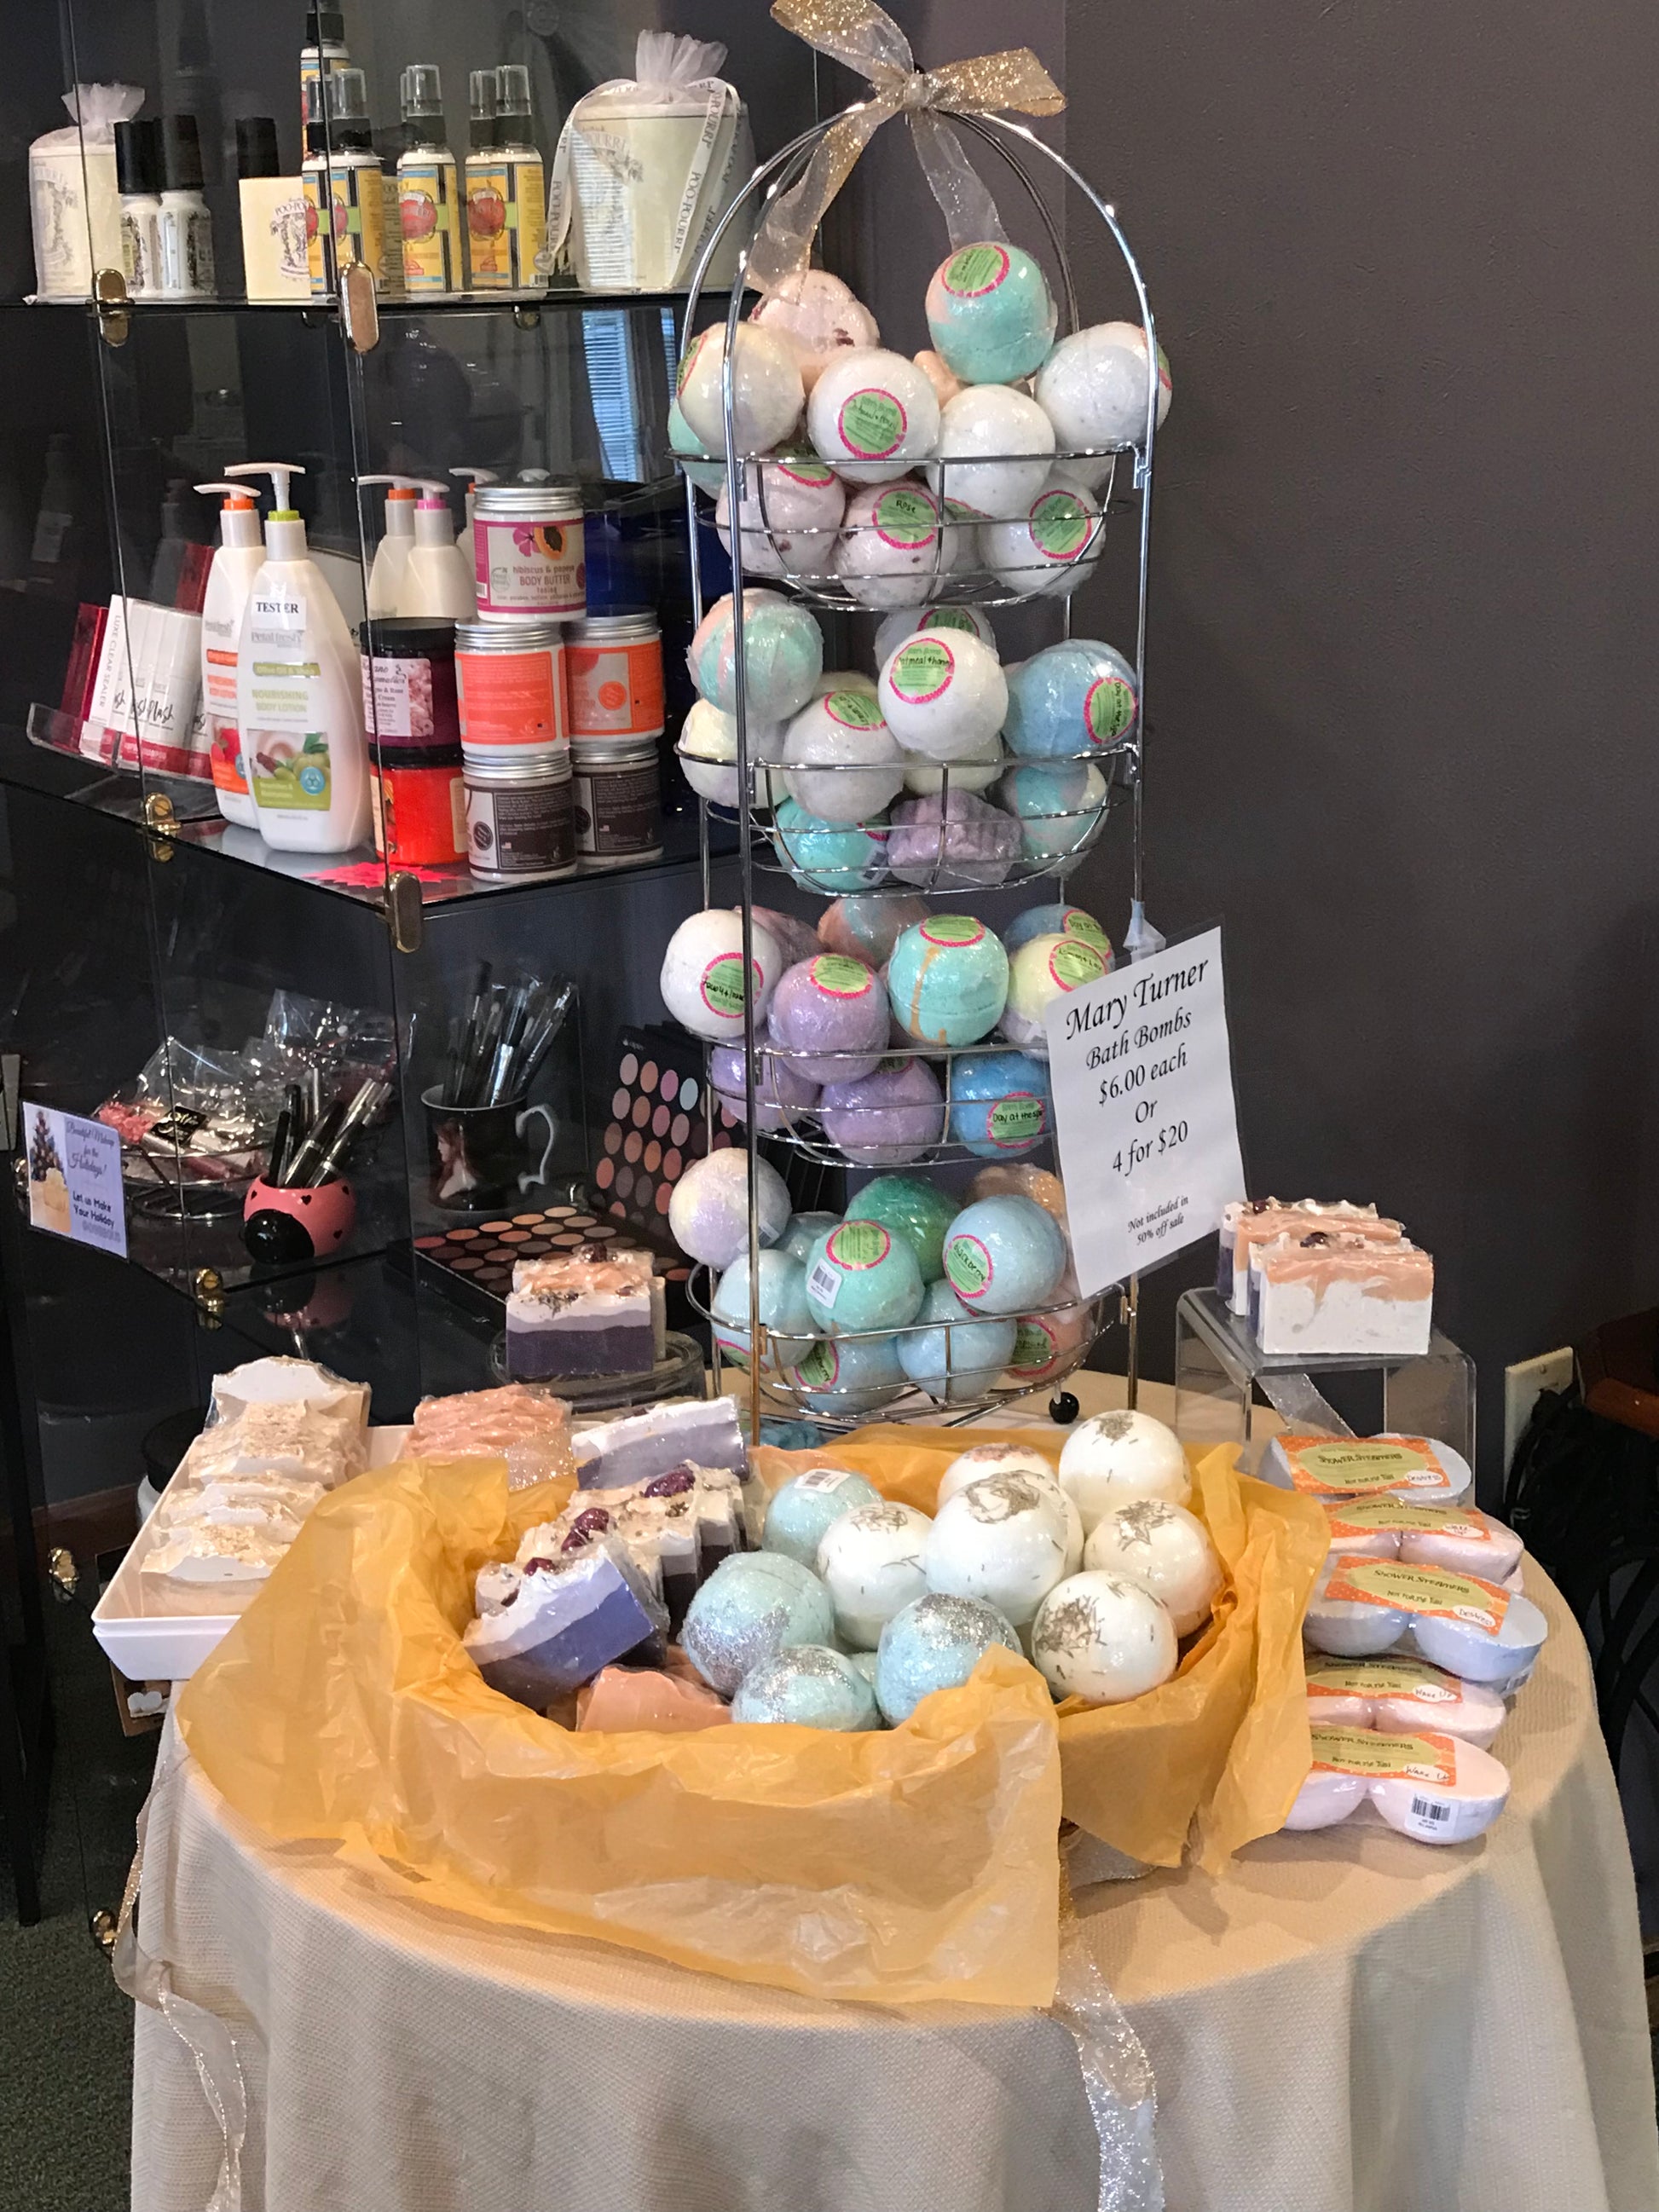 Mary Turner Spa Bath Bombs - Mary Turner Day Spa & Boutique